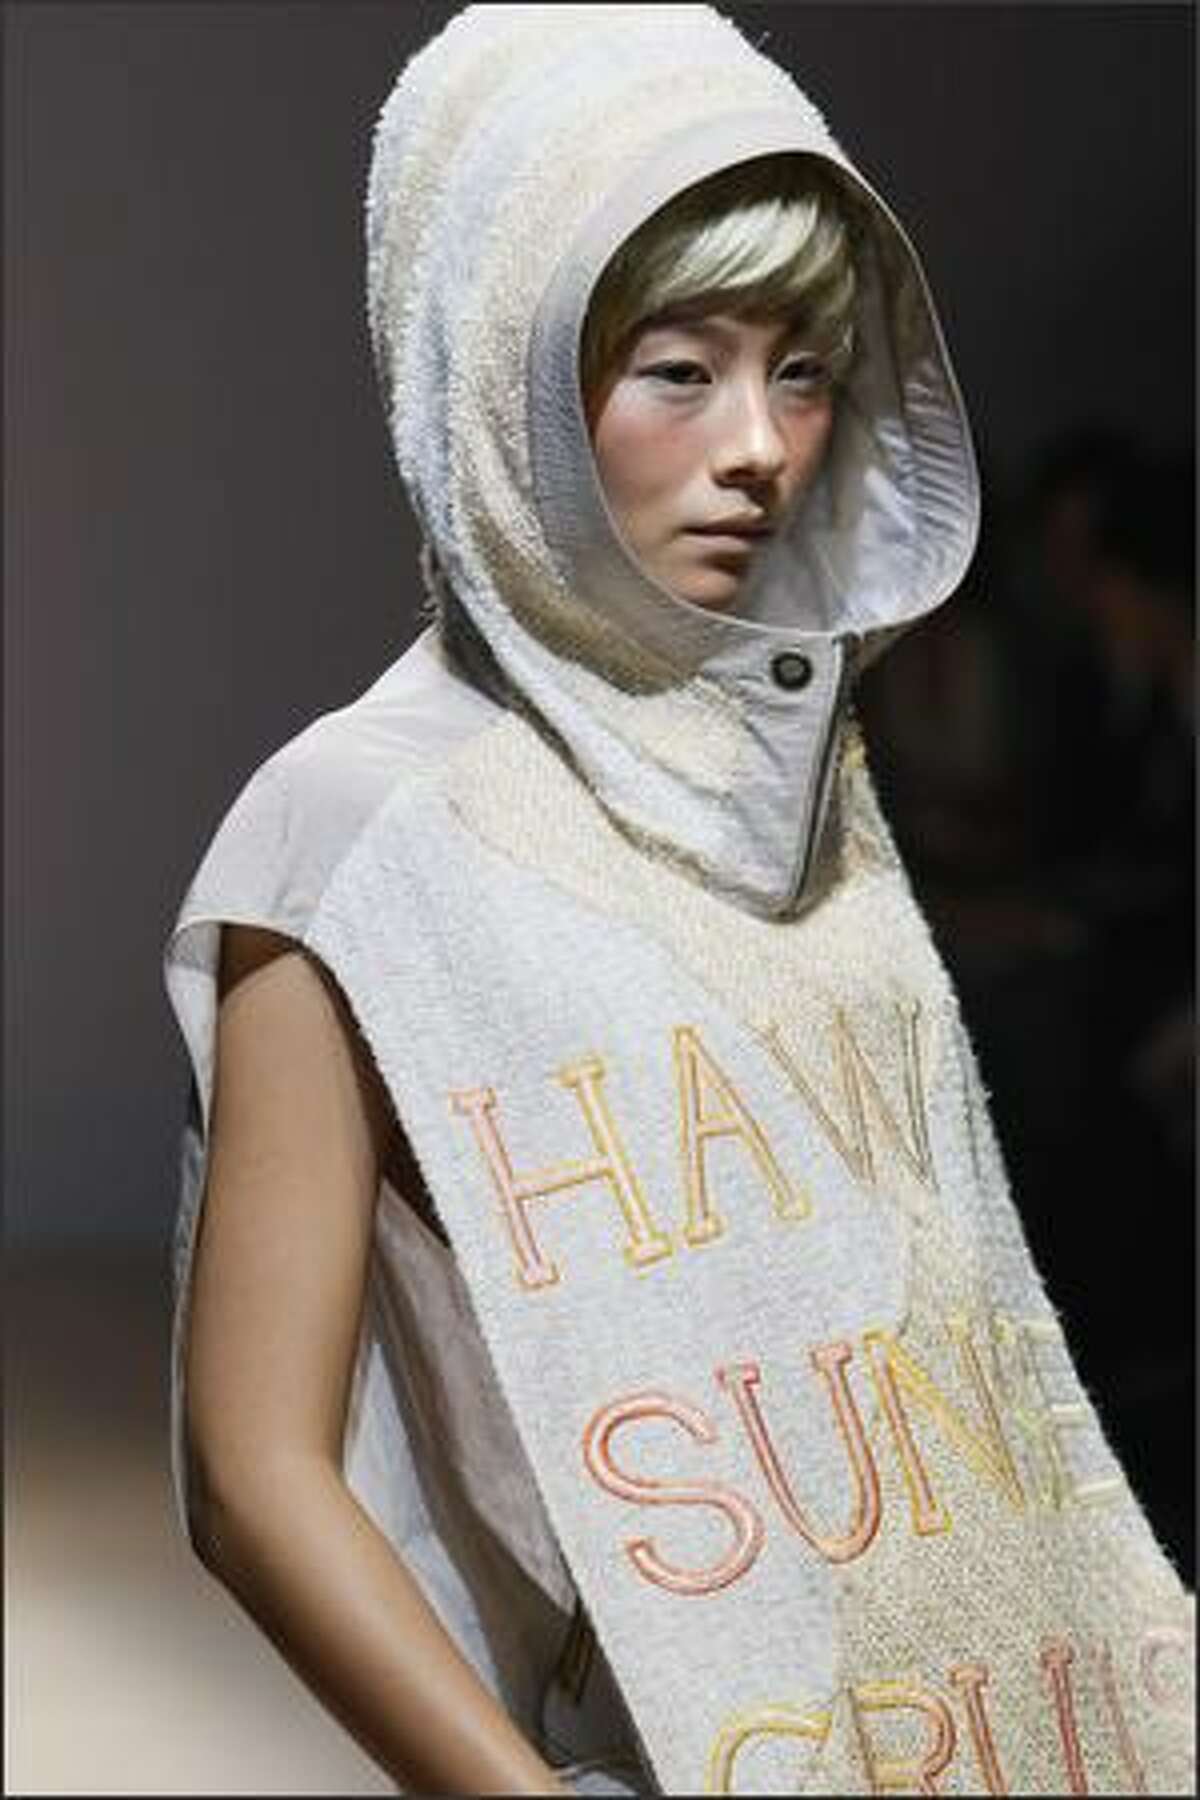 A model displays a creation during the Mikio Sakabe 2009 spring/summer collection, designed by Mikio Sakabe and Shueh Jen-Fang of Taiwan in Tokyo at Japan Fashion Week on Monday in Tokyo.